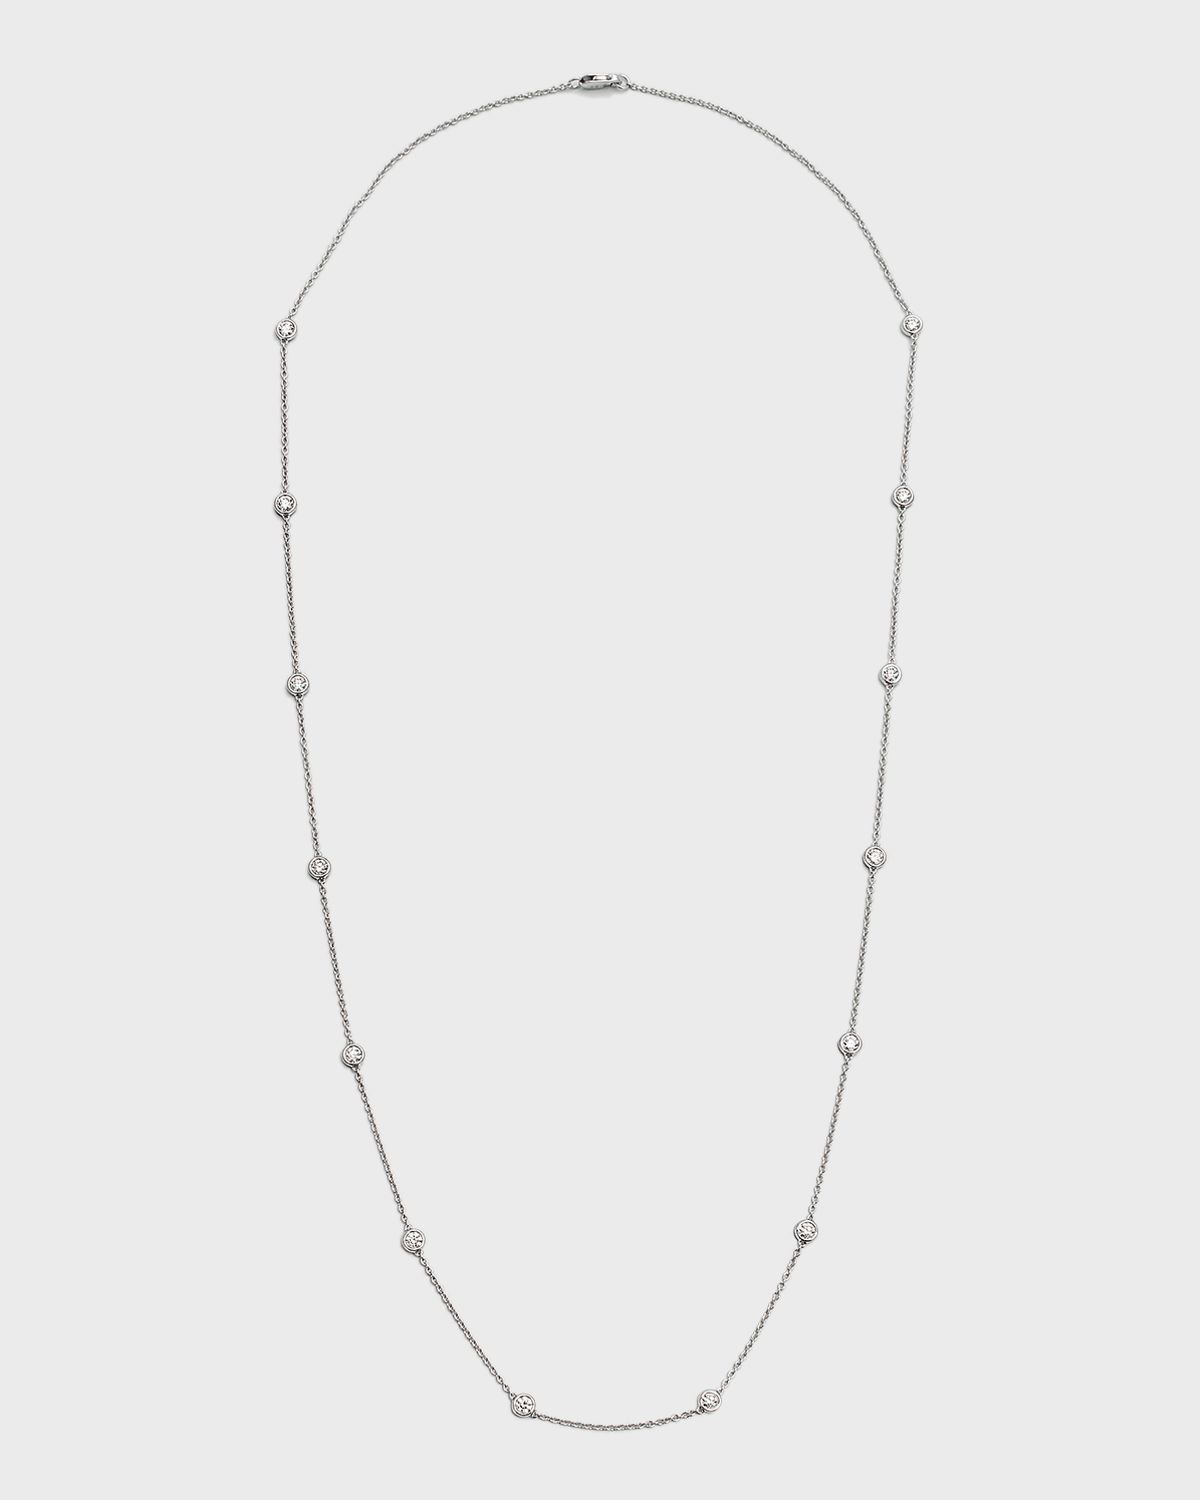 18K White Gold Round Diamond By-the-Yard Necklace, 24"L